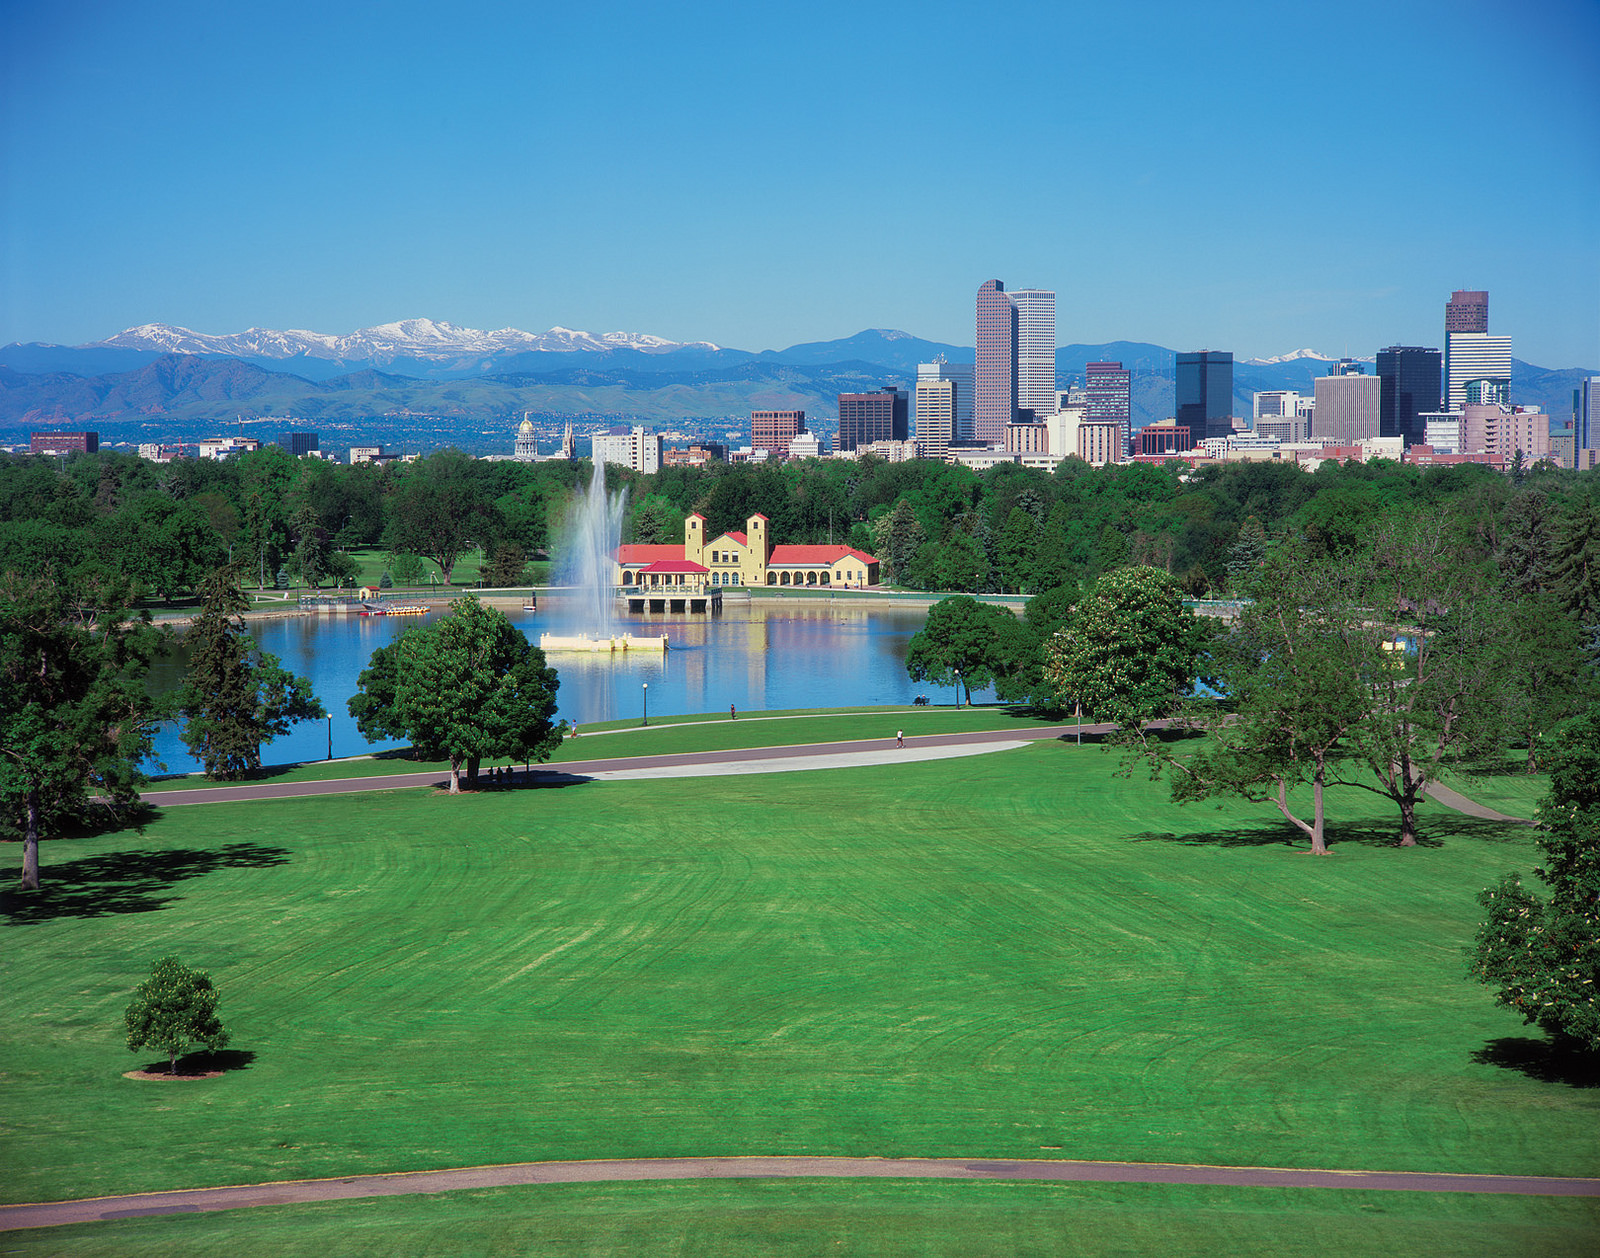 Join us for the annual Denver Carolina Club Picnic on Sept. 9